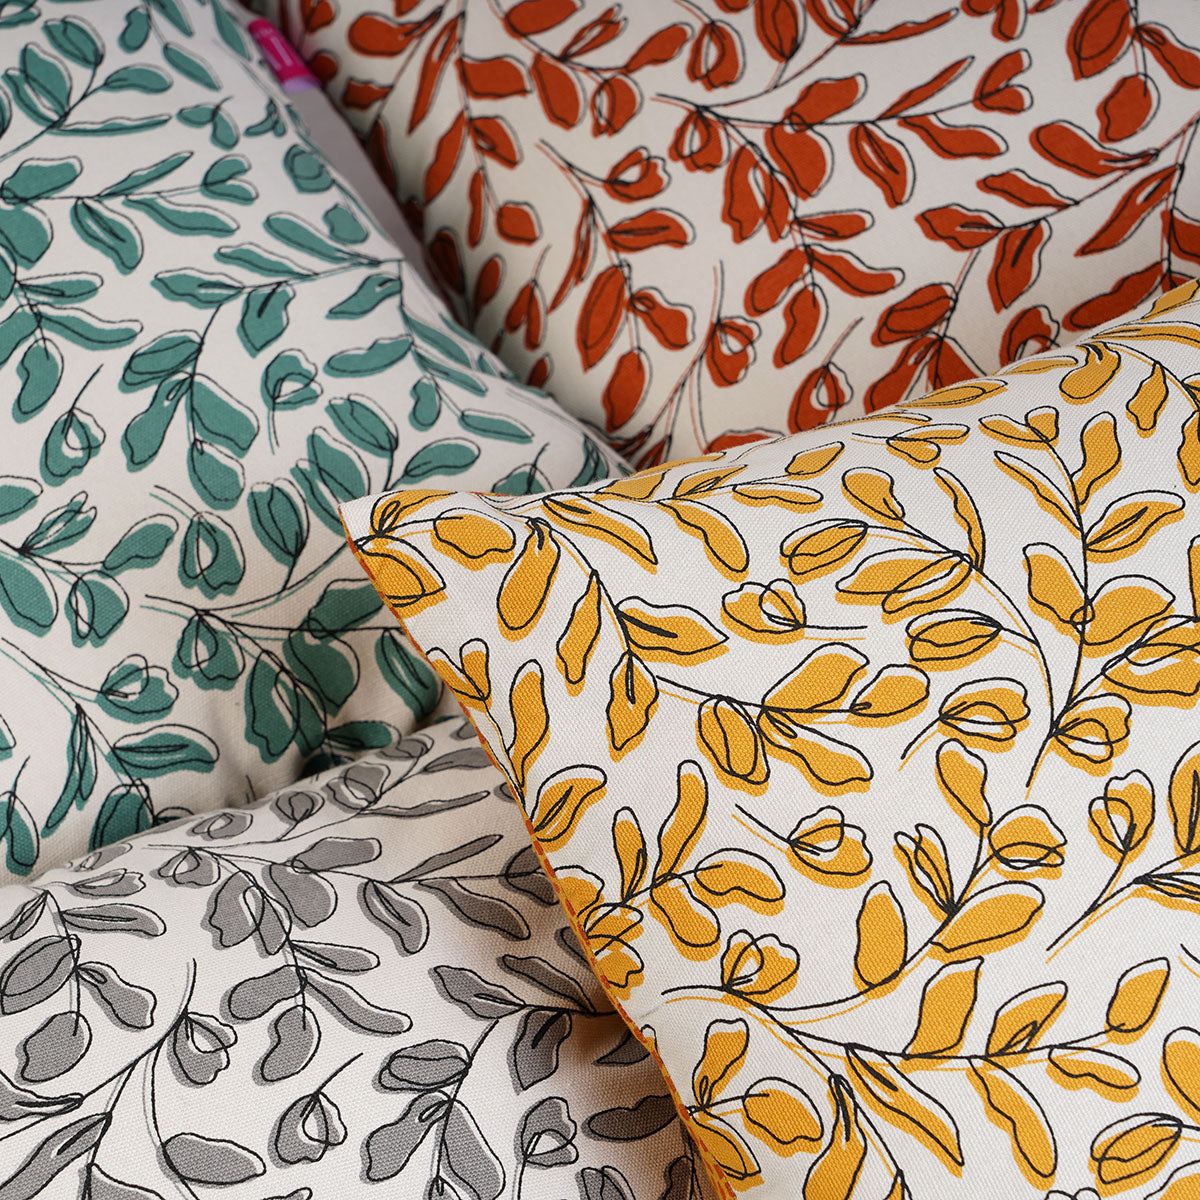 MODERN RETRO - Terracotta reversible cotton throw pillow cover, leaf print, sizes available.